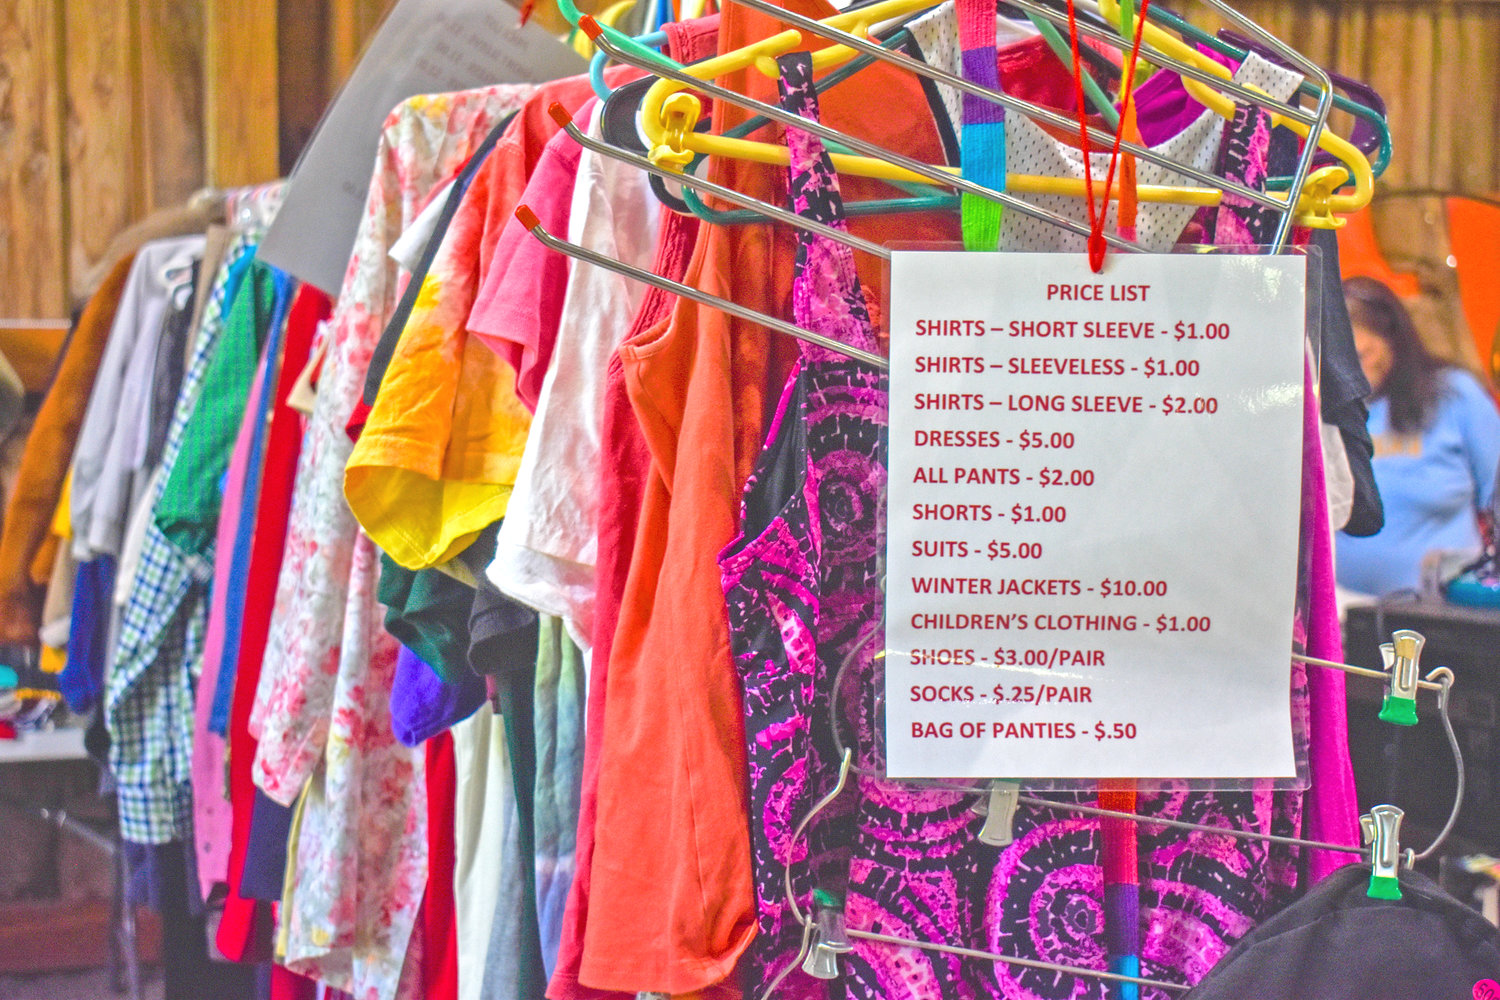 Clothing items are for sale at the Great Swamp Conservancy, located at 8375 N Main Street Road, Canastota. The last day of the sale is Saturday, July 9 from 9 a.m. - 3 p.m.